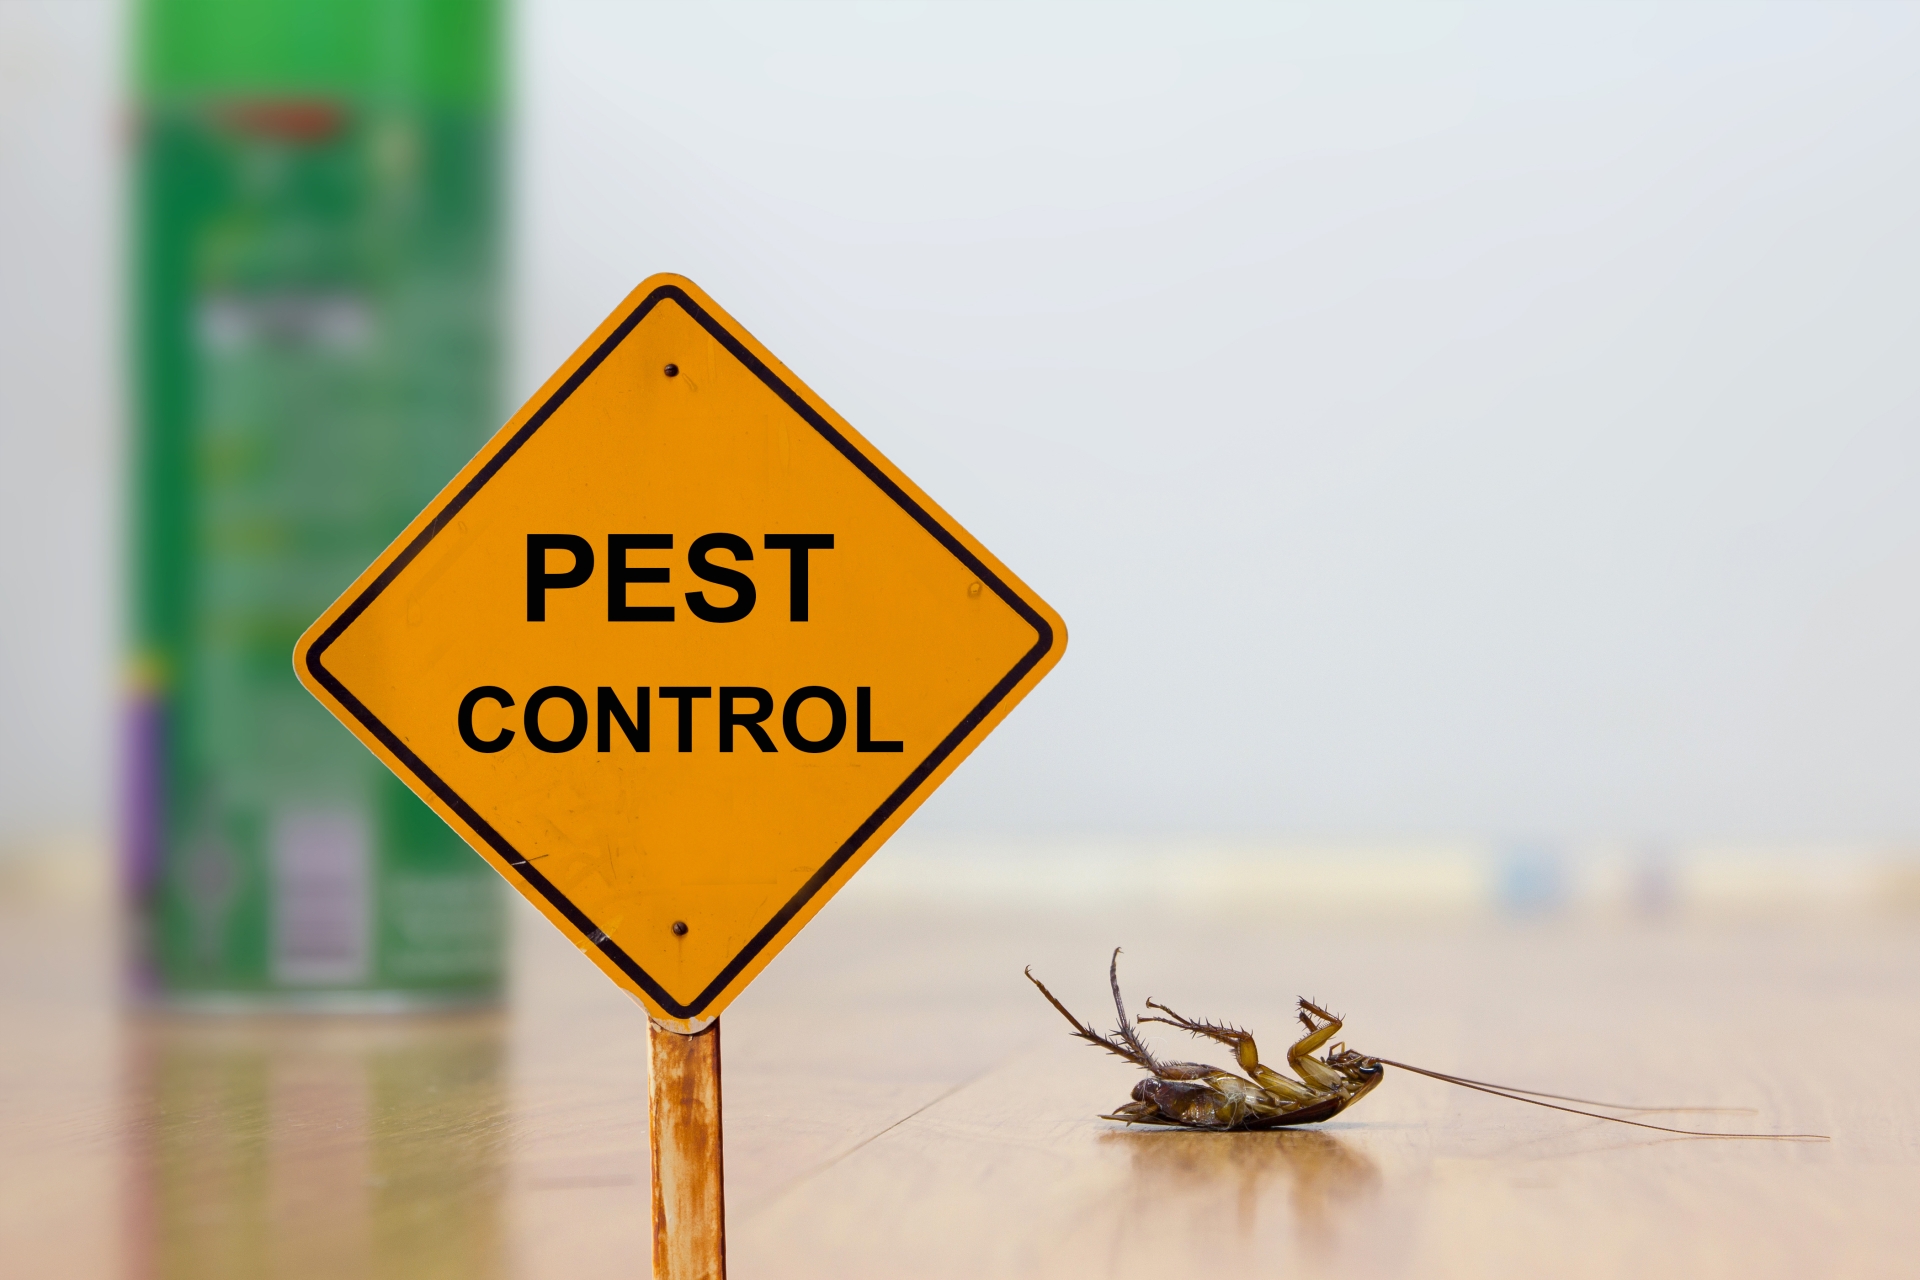 24 Hour Pest Control, Pest Control in Longfield, Hartley, New Ash Green, DA3. Call Now 020 8166 9746